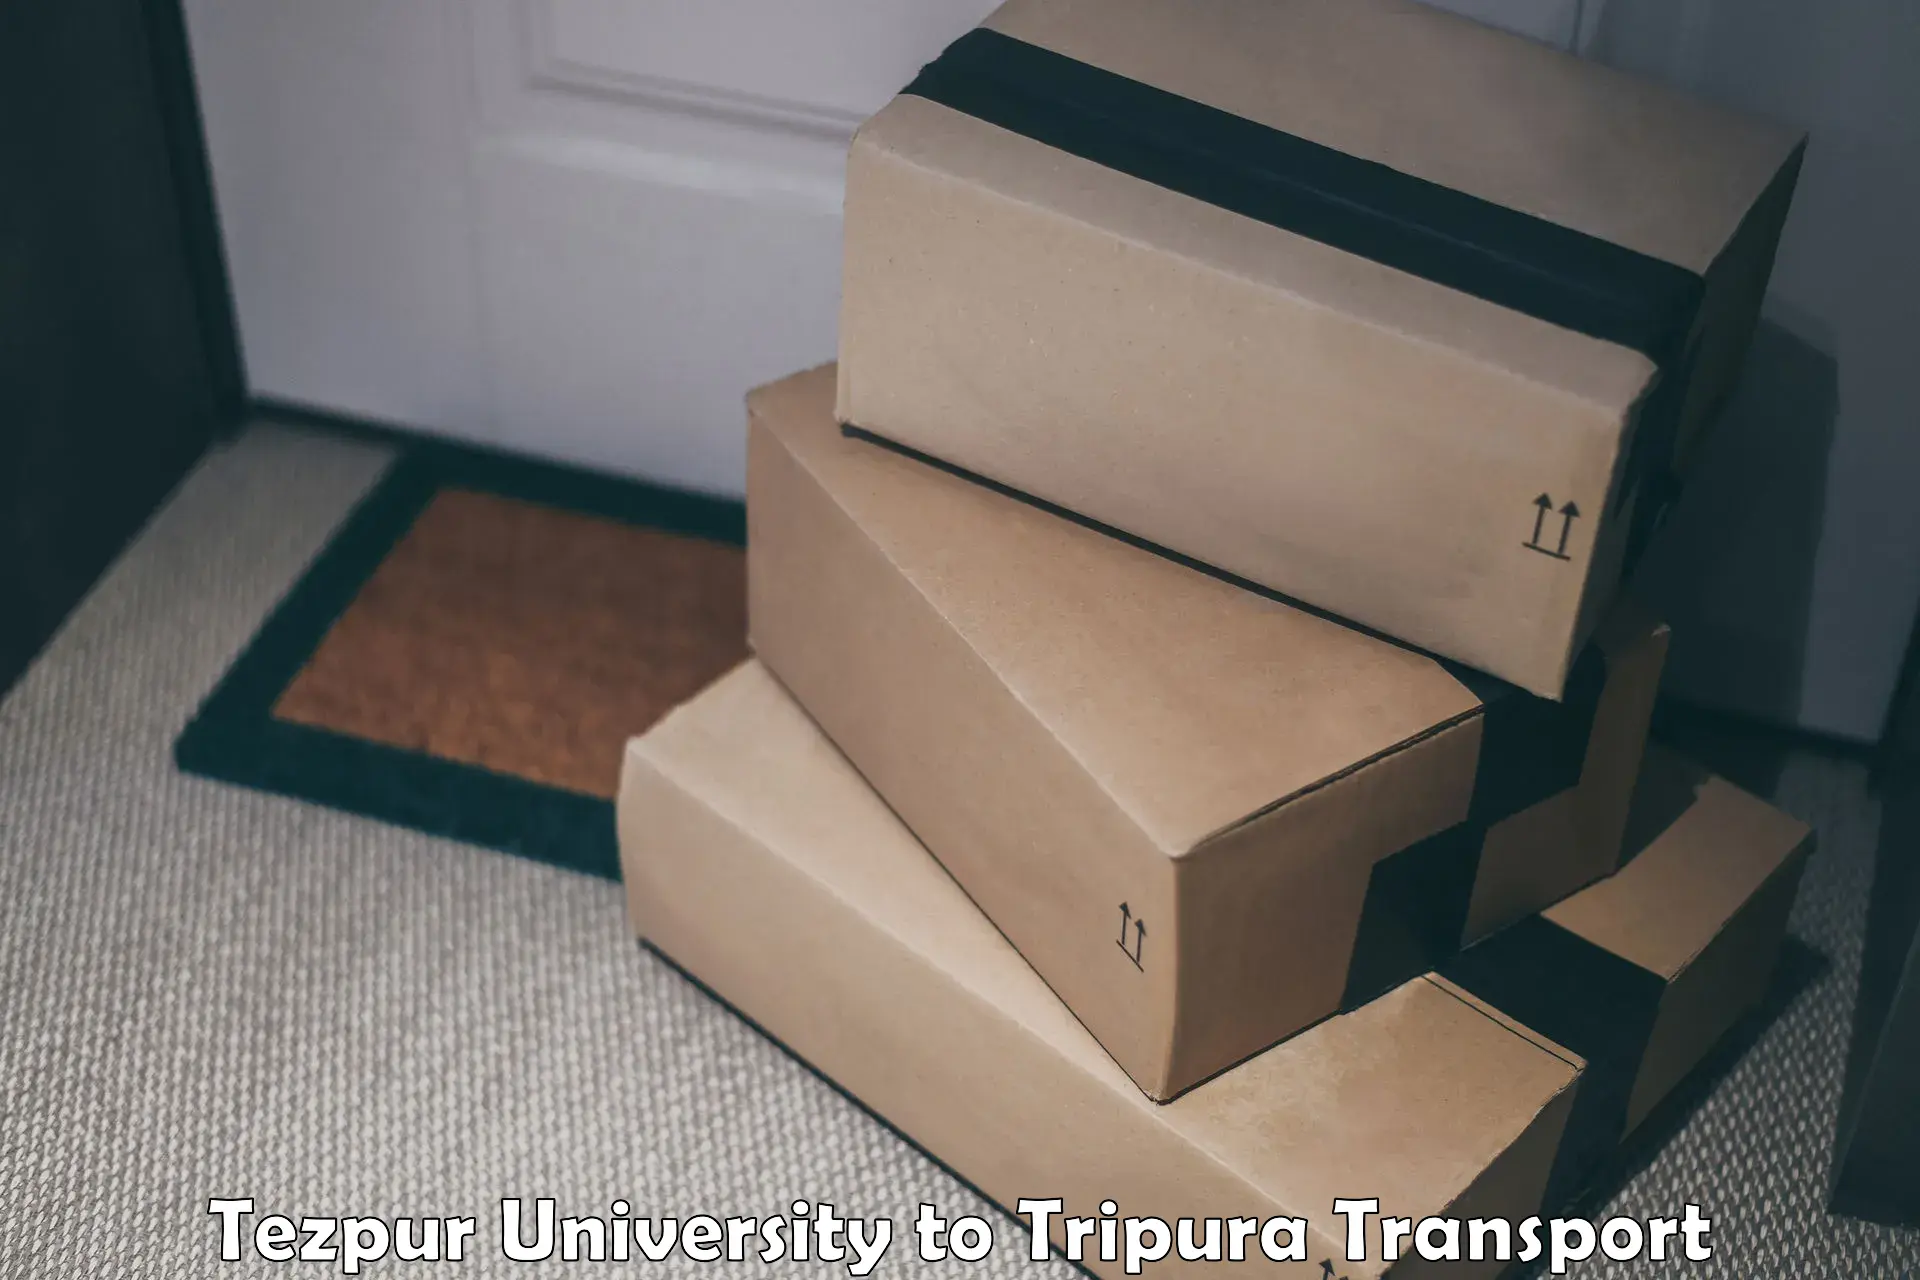 Nearby transport service in Tezpur University to Dhalai